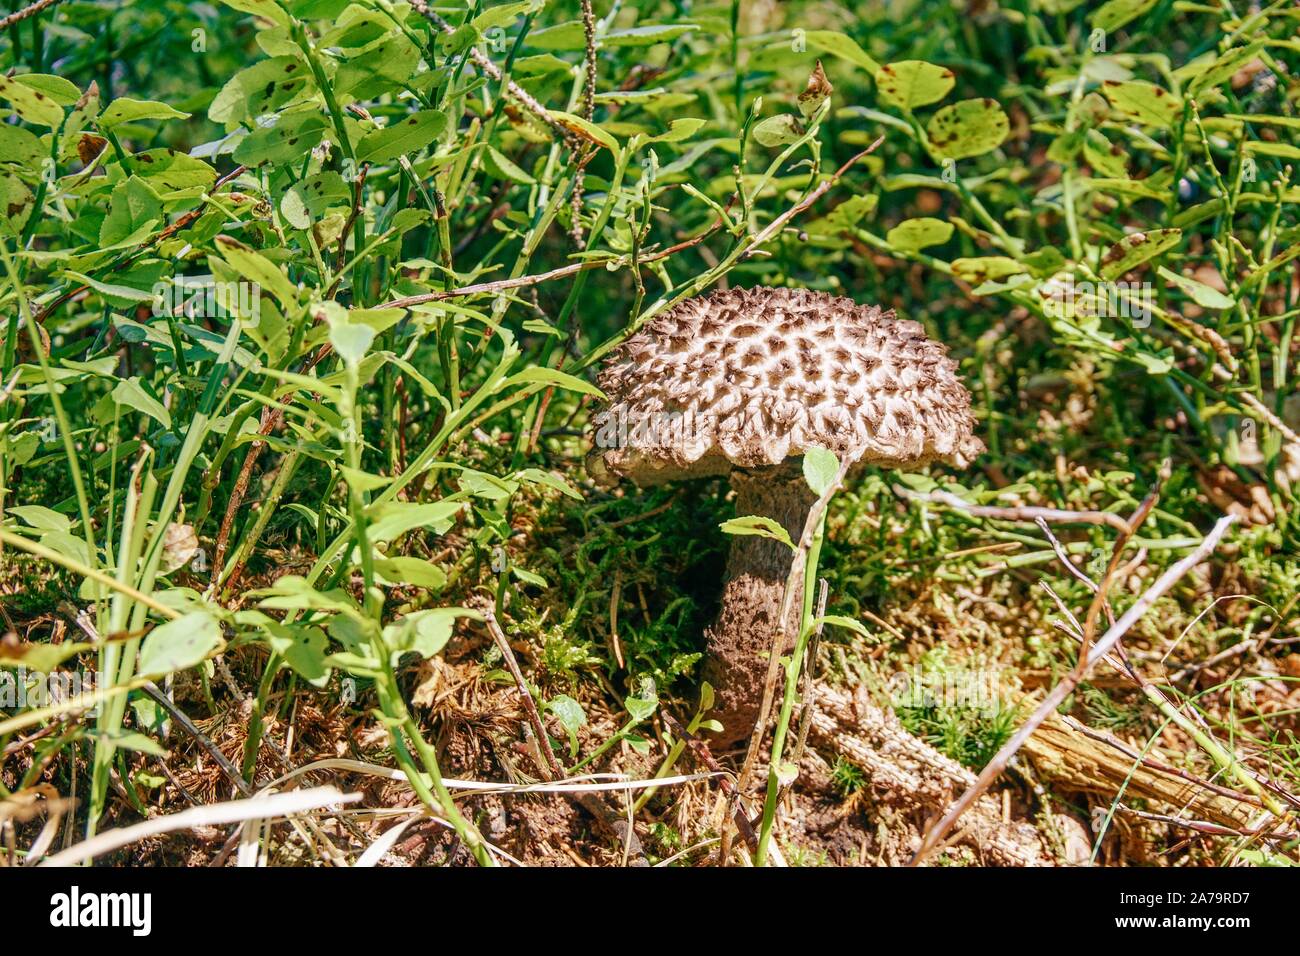 Horizontal photo of rare mushroom Strobilomyces. Mushroom has specific head and stem with grey color. Mushroom grows in grass with small green shrubs Stock Photo